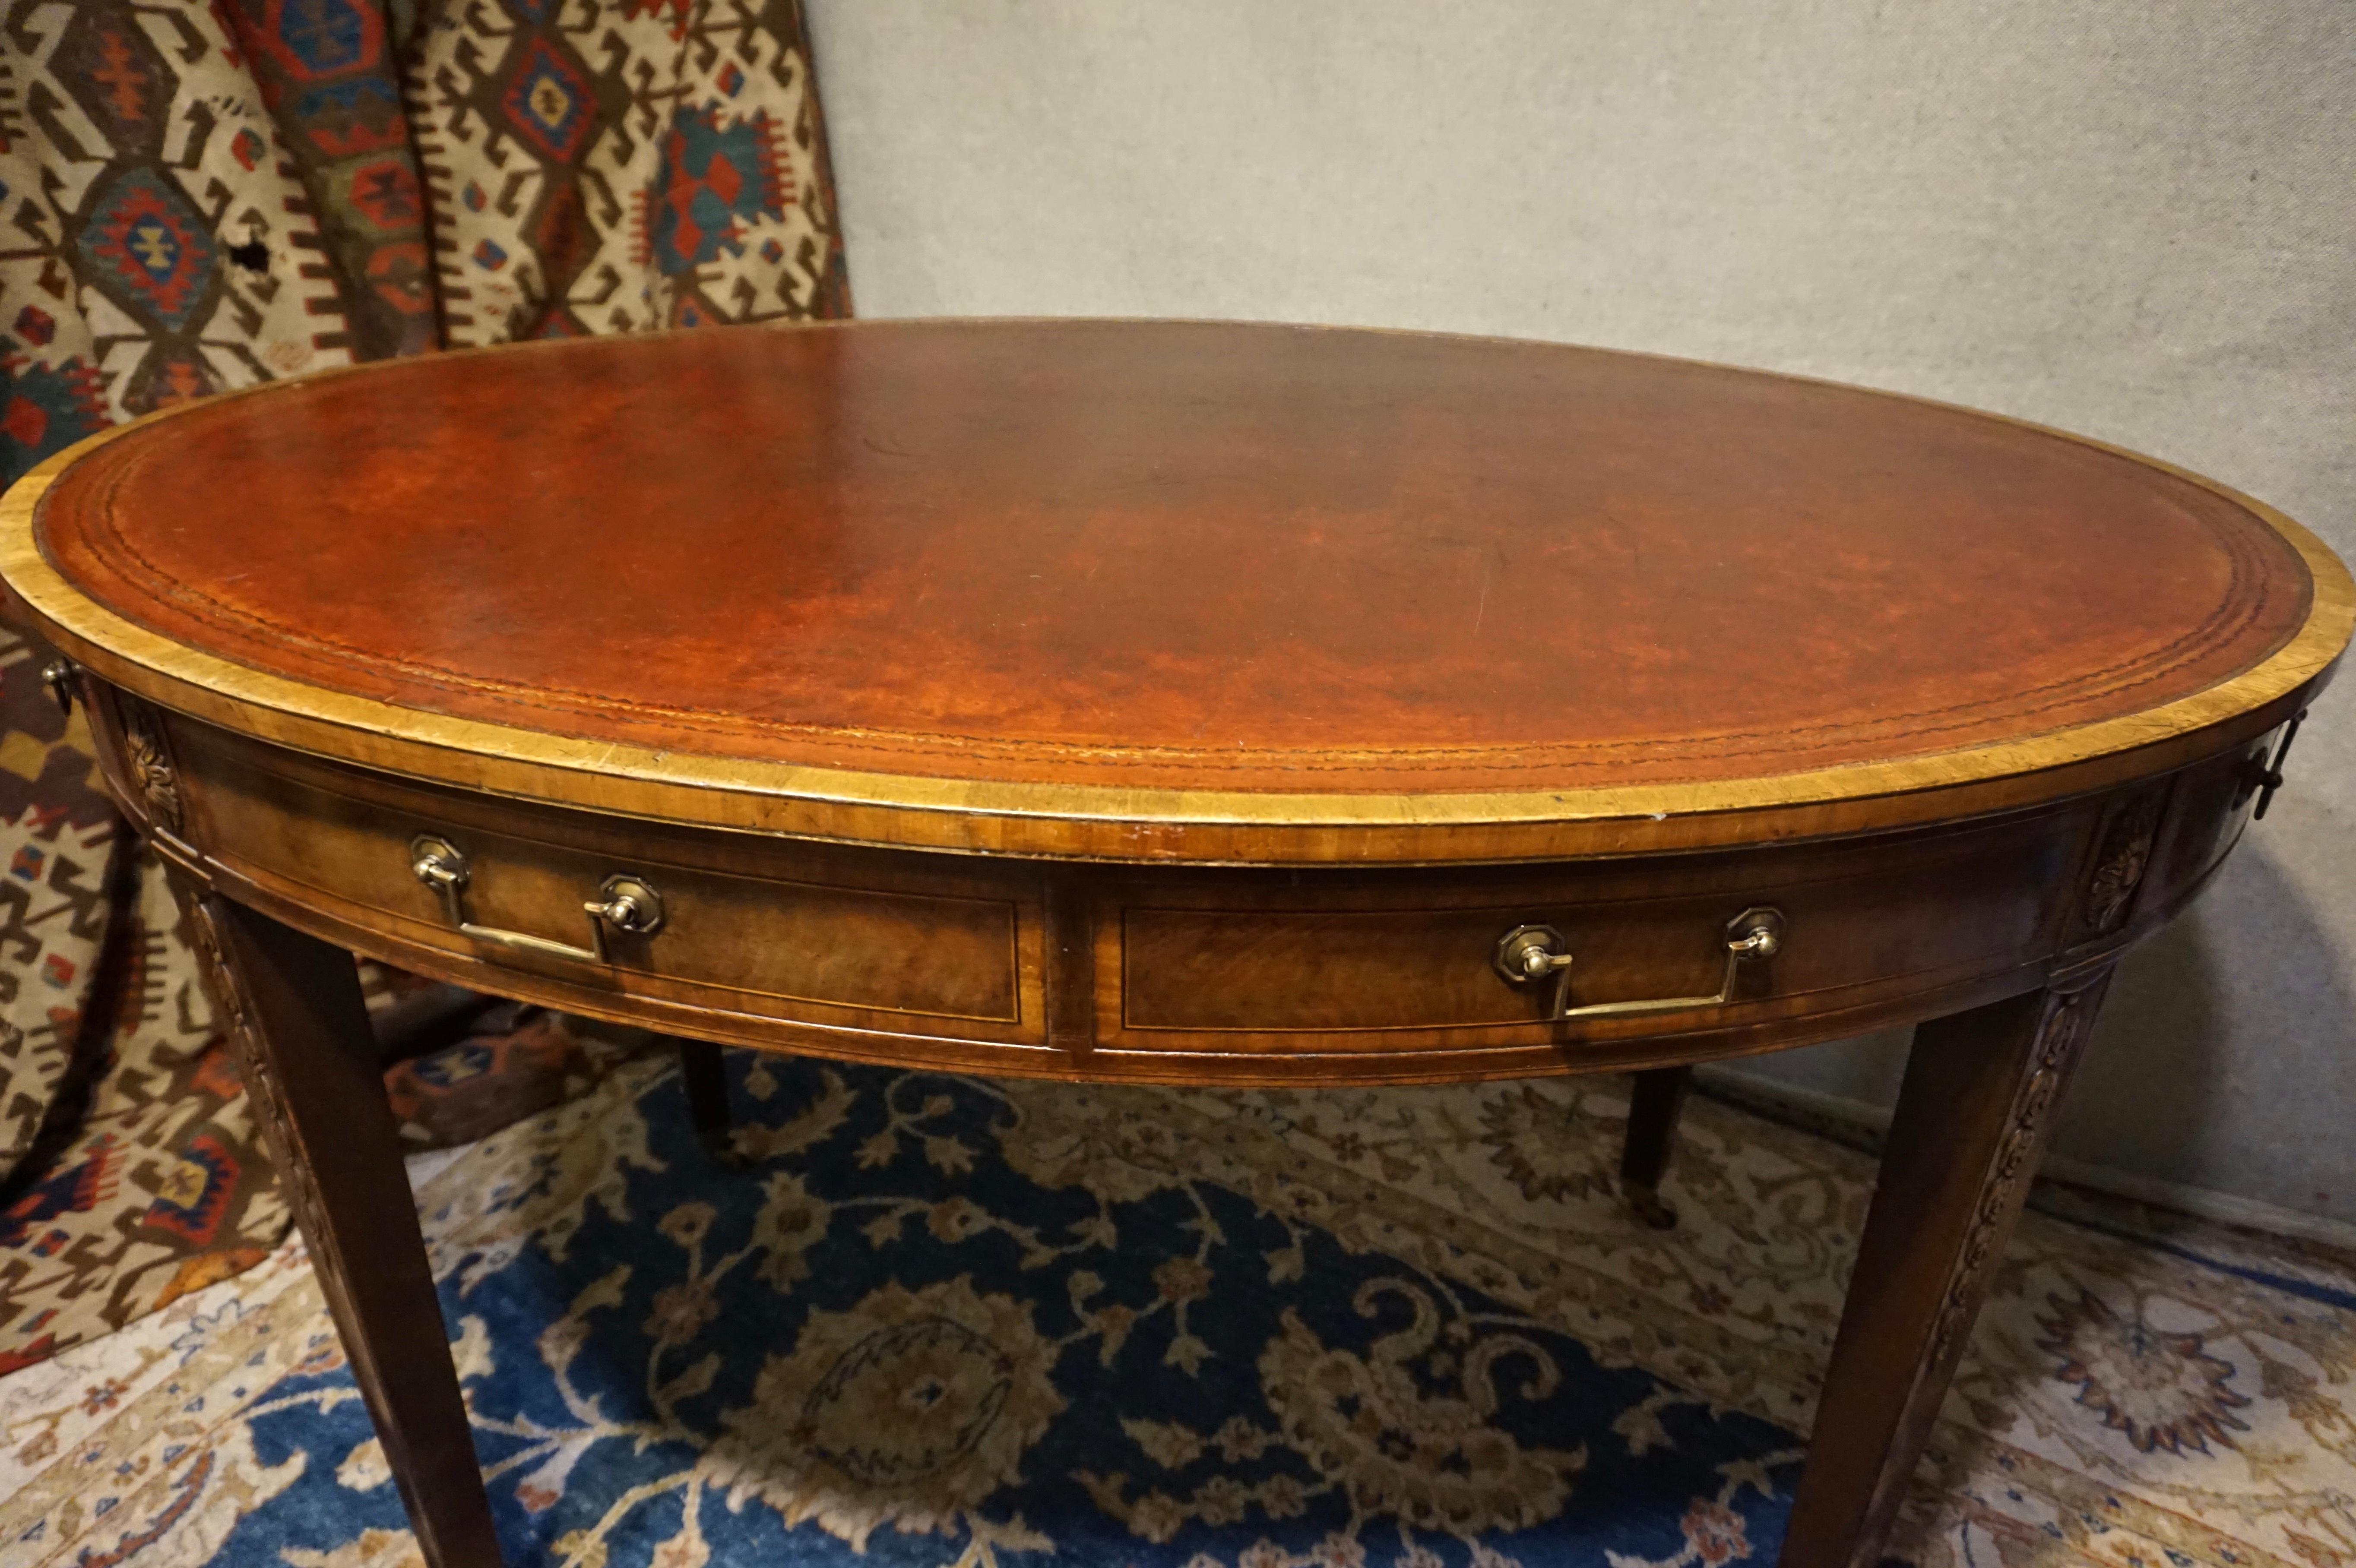 Late 19th Century English Regency Revival Mahogany Oval Table with Gilt Leather Top